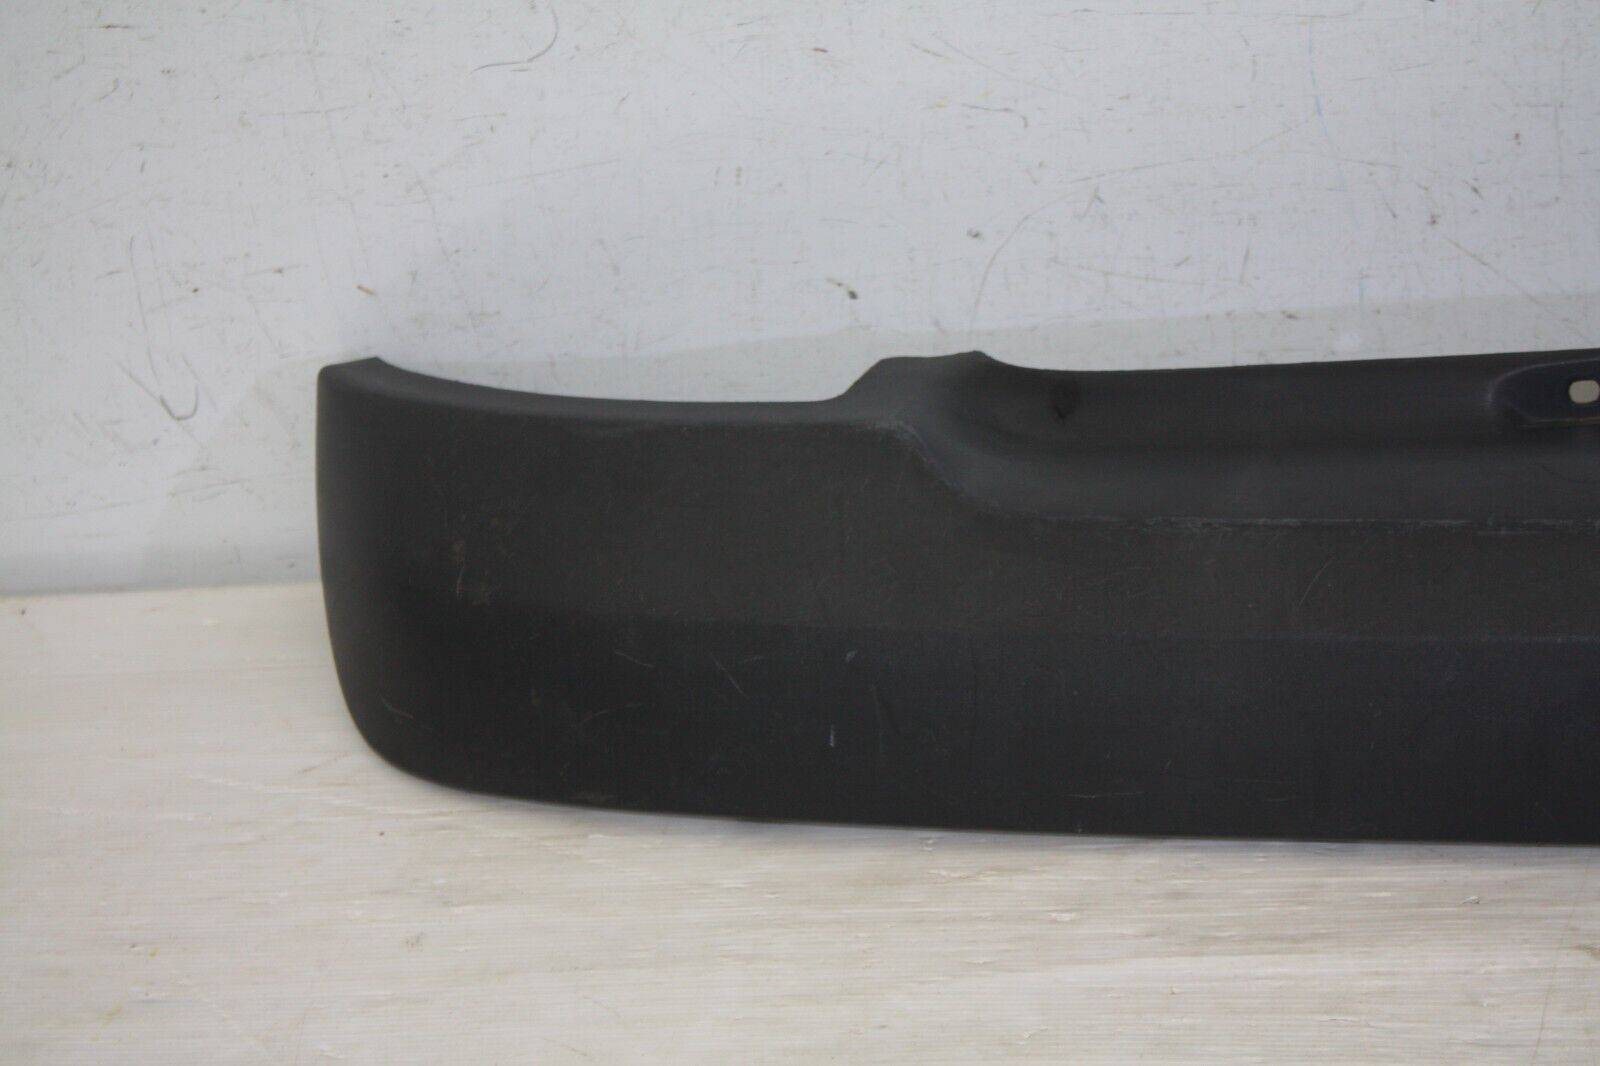 Renault-Clio-Rear-Bumper-Upper-Section-2001-TO-2005-8200083217-Genuine-176093485781-6